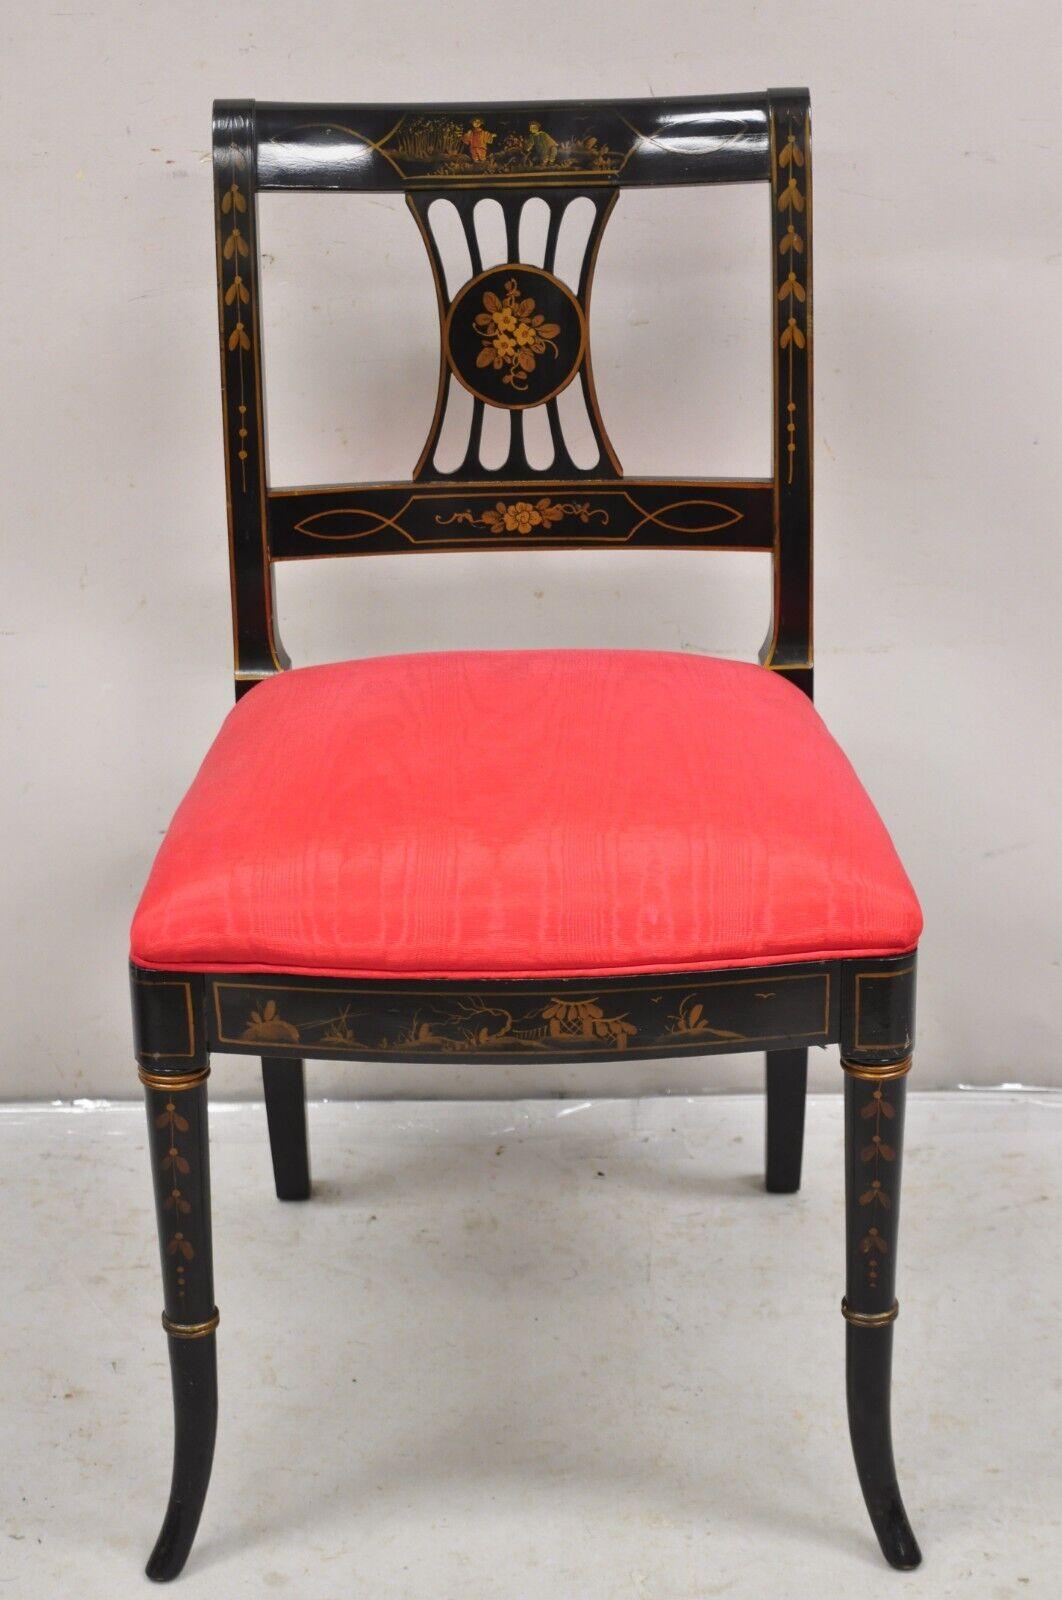 20th Century Vintage Chinoiserie English Regency Style Black Painted Dining Chairs - Set of 6 For Sale